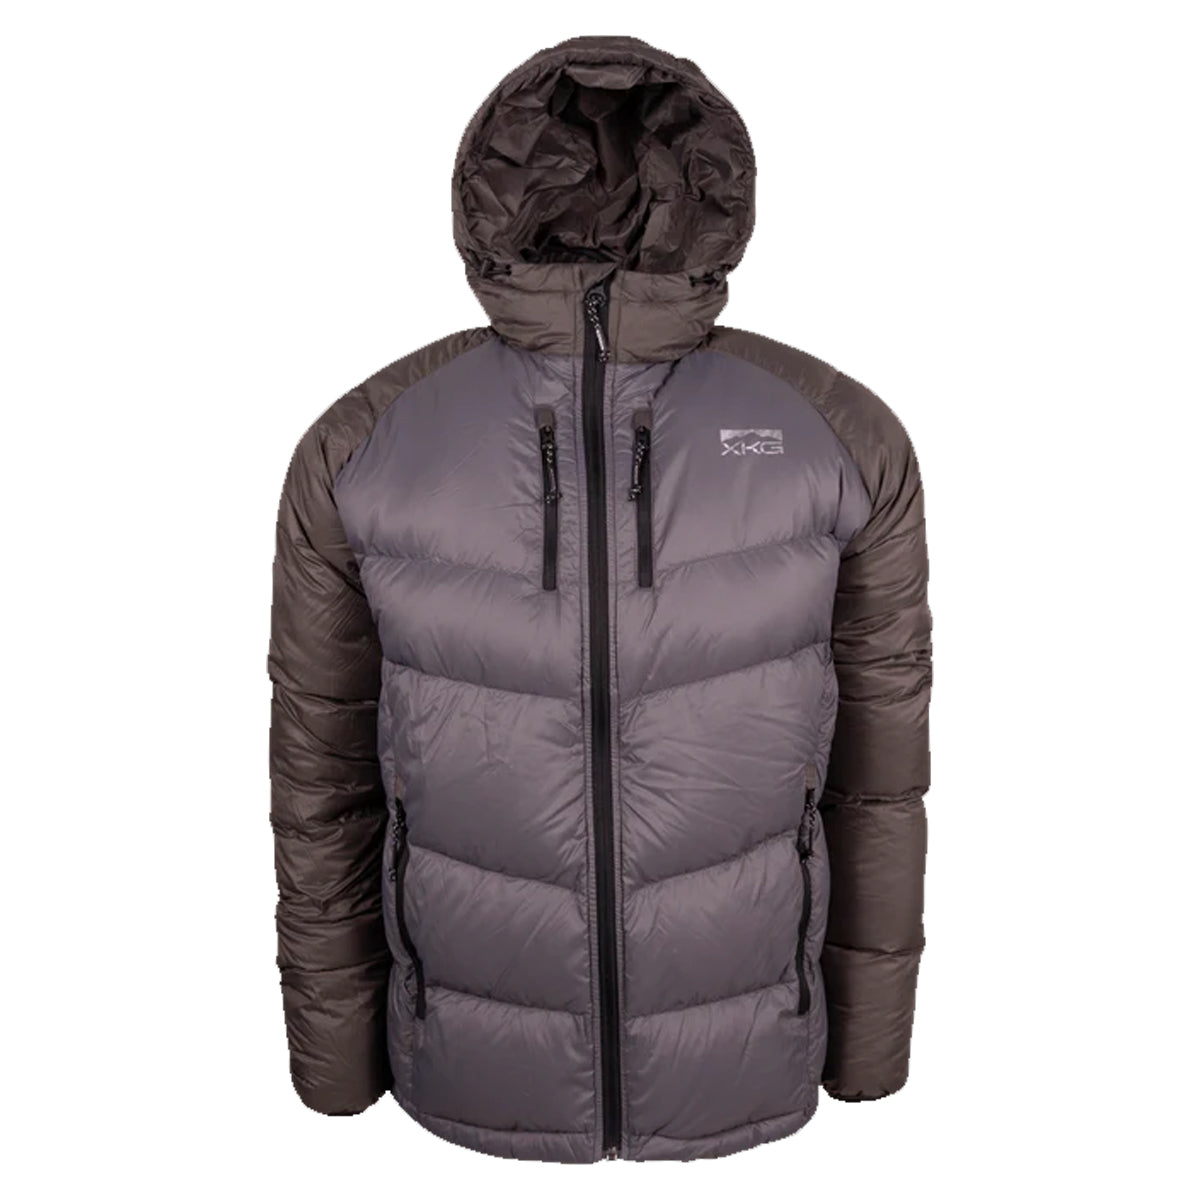 King's XKG Down Transition Jacket in Charcoal by GOHUNT | King's - GOHUNT Shop